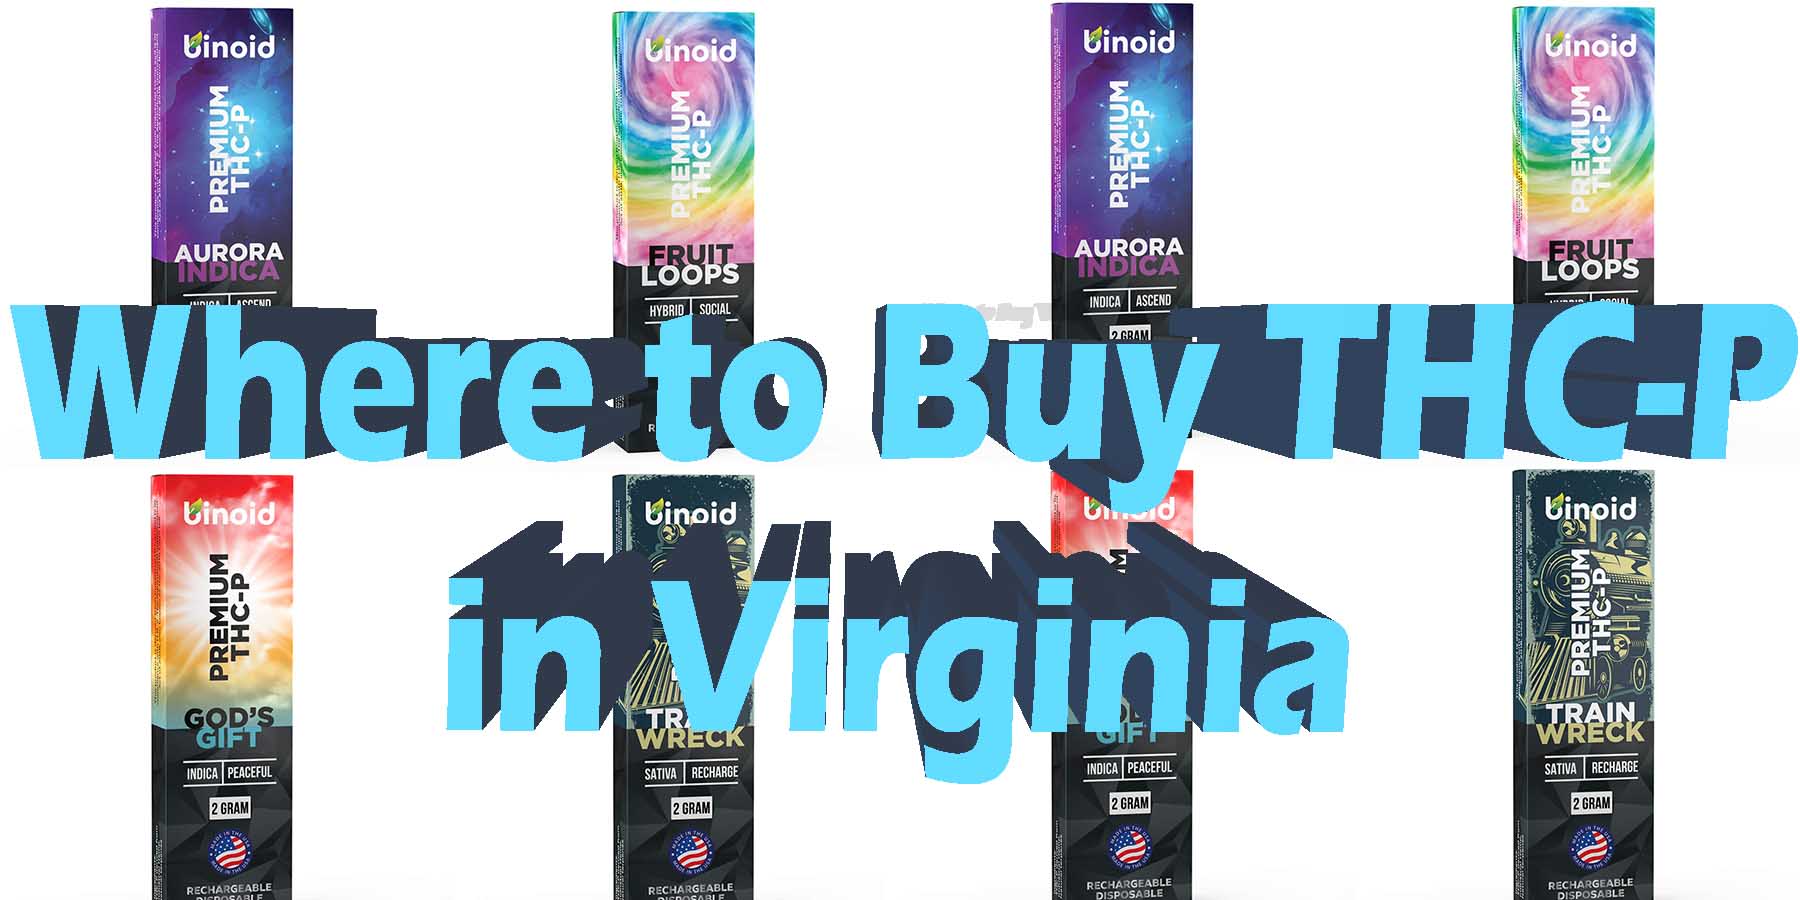 Where to Buy THC-P in Virginia Which Is Better HowToGetNearMe BestPlace LowestPrice Coupon Discount For Smoking Best High Smoke Binoid.